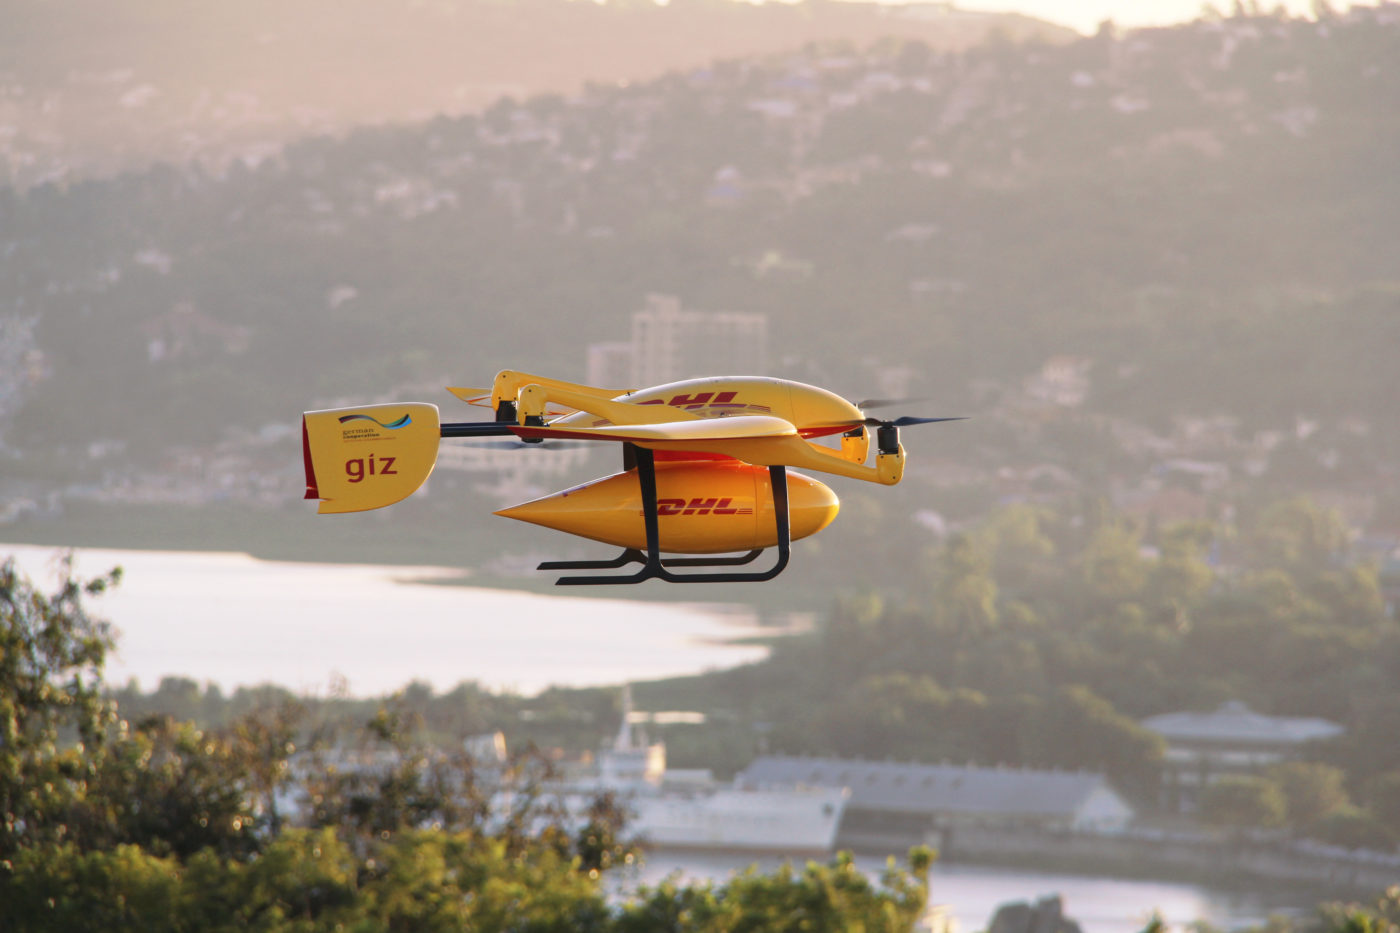 The DHL Parcelcopter 4.0 barely requires any infrastructure as it takes off and lands vertically. Wingcopter Photo